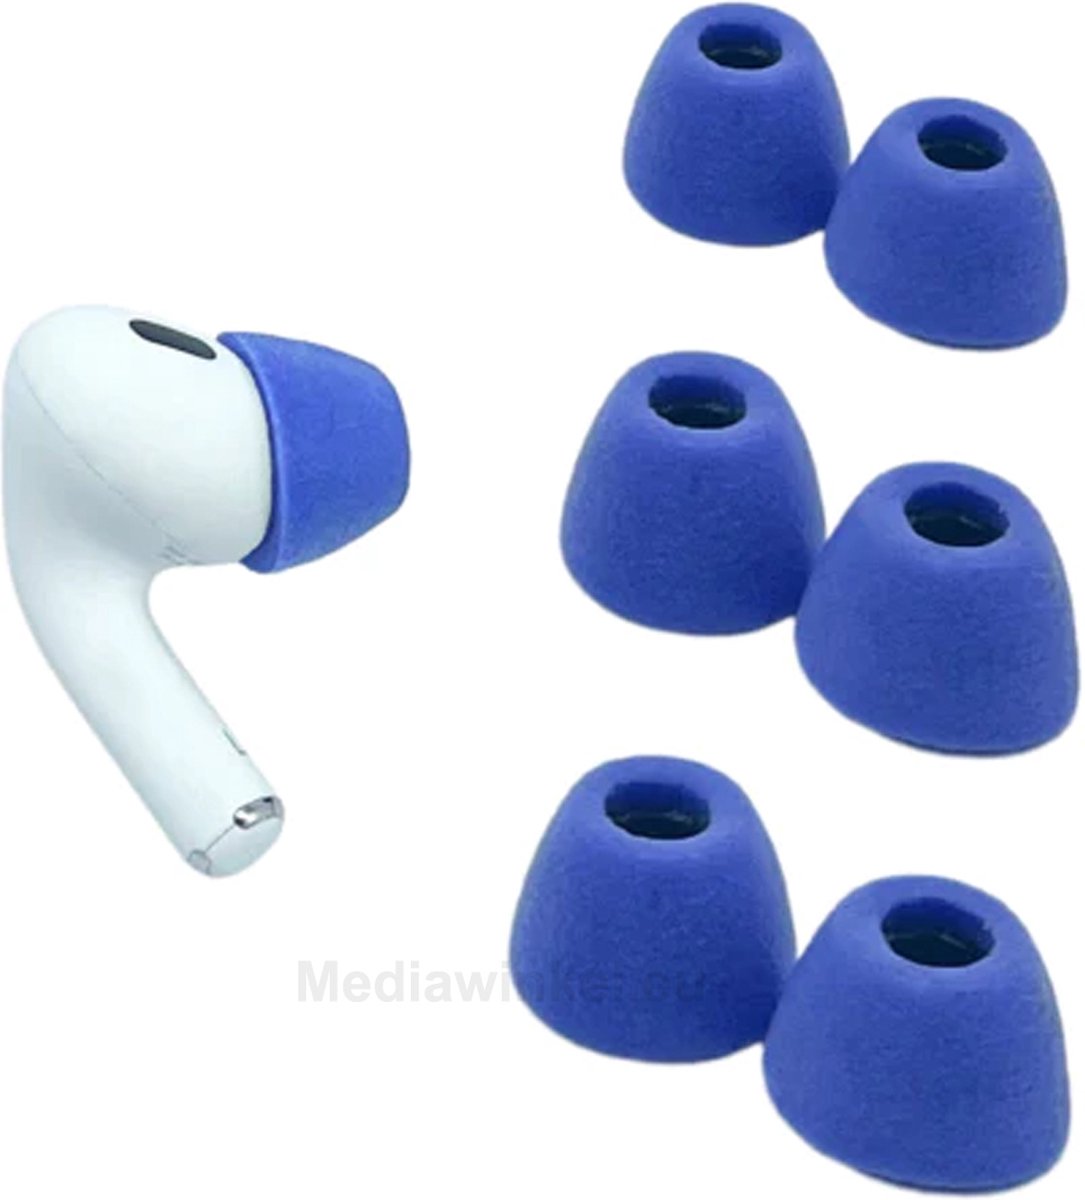 Comply Foam Tips 2.0 voor AirPods Pro, size: large, Electrice Blue